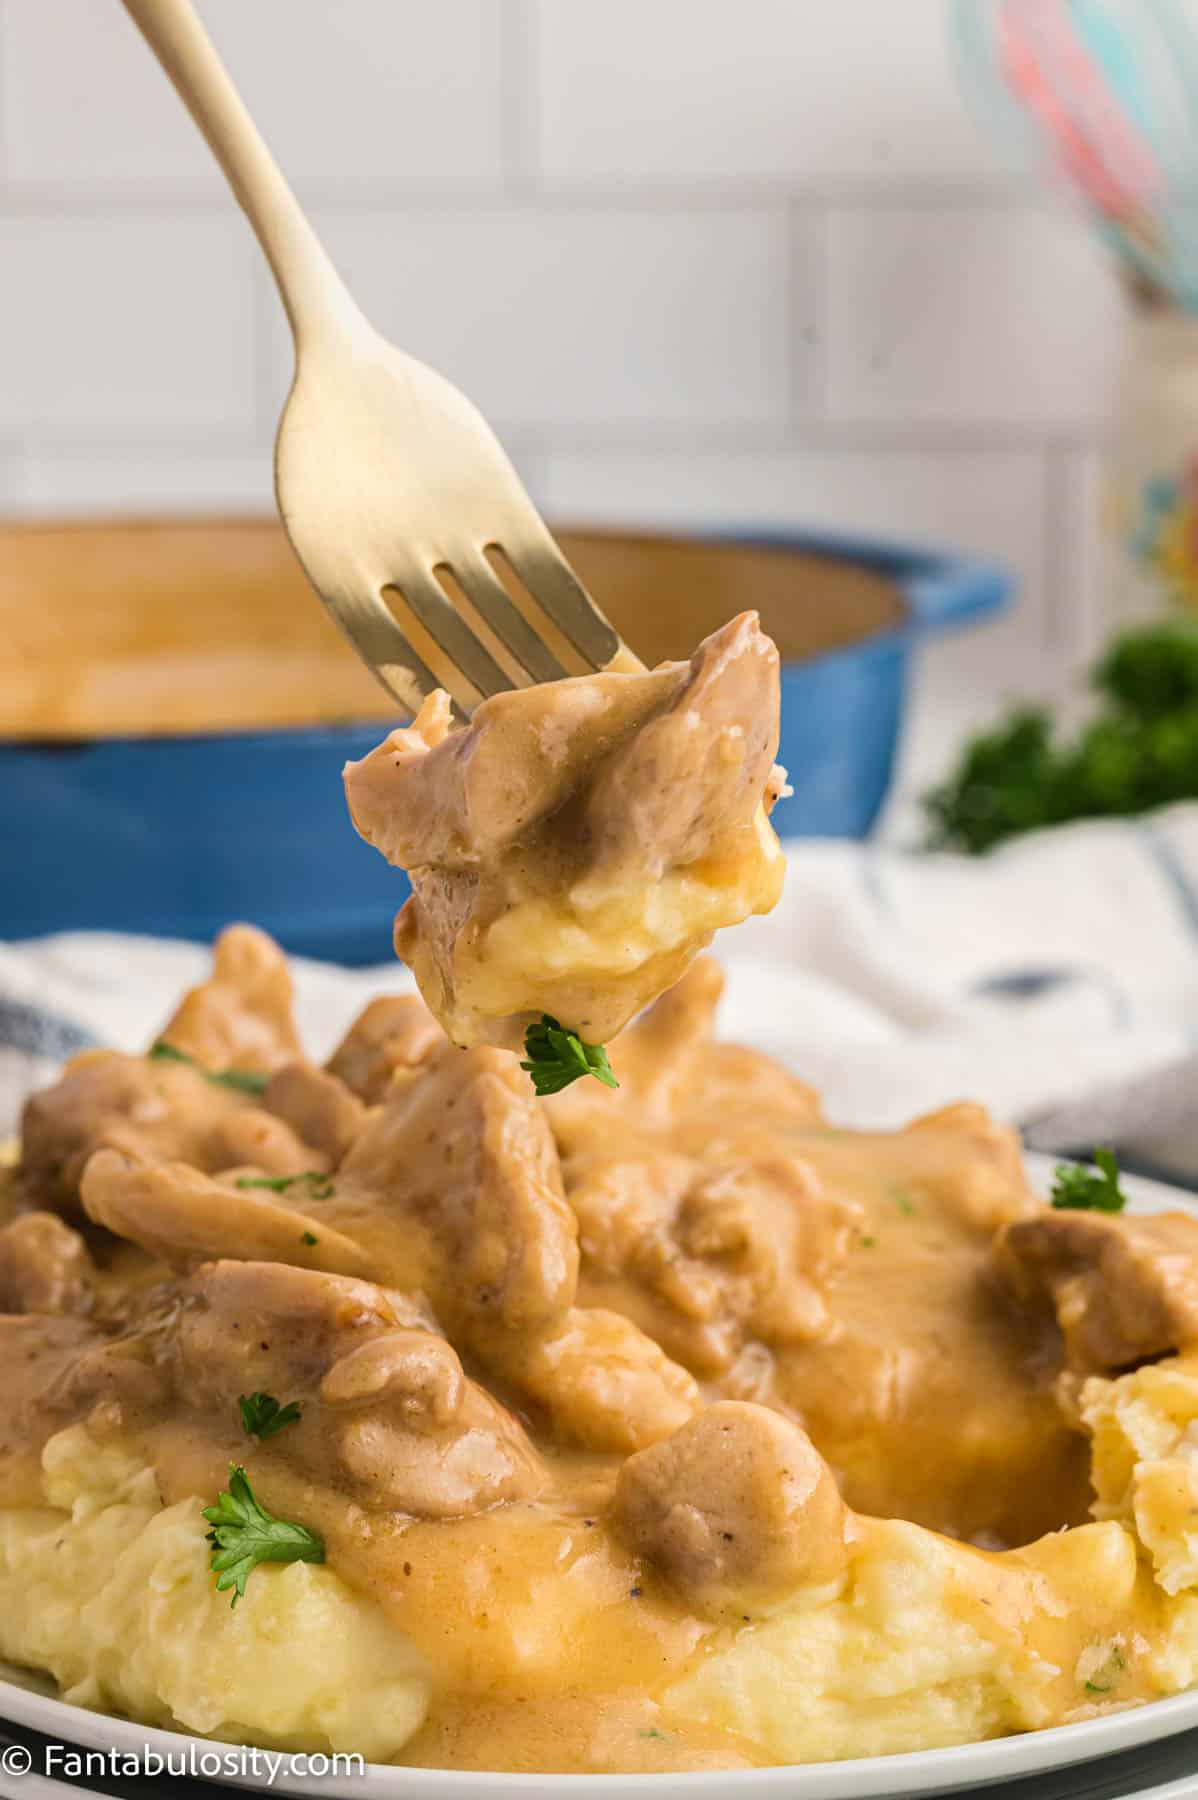 A gold fork has speared several pieces of tender chicken and is held over a plate of mashed potatoes smothered in the same creamy chicken